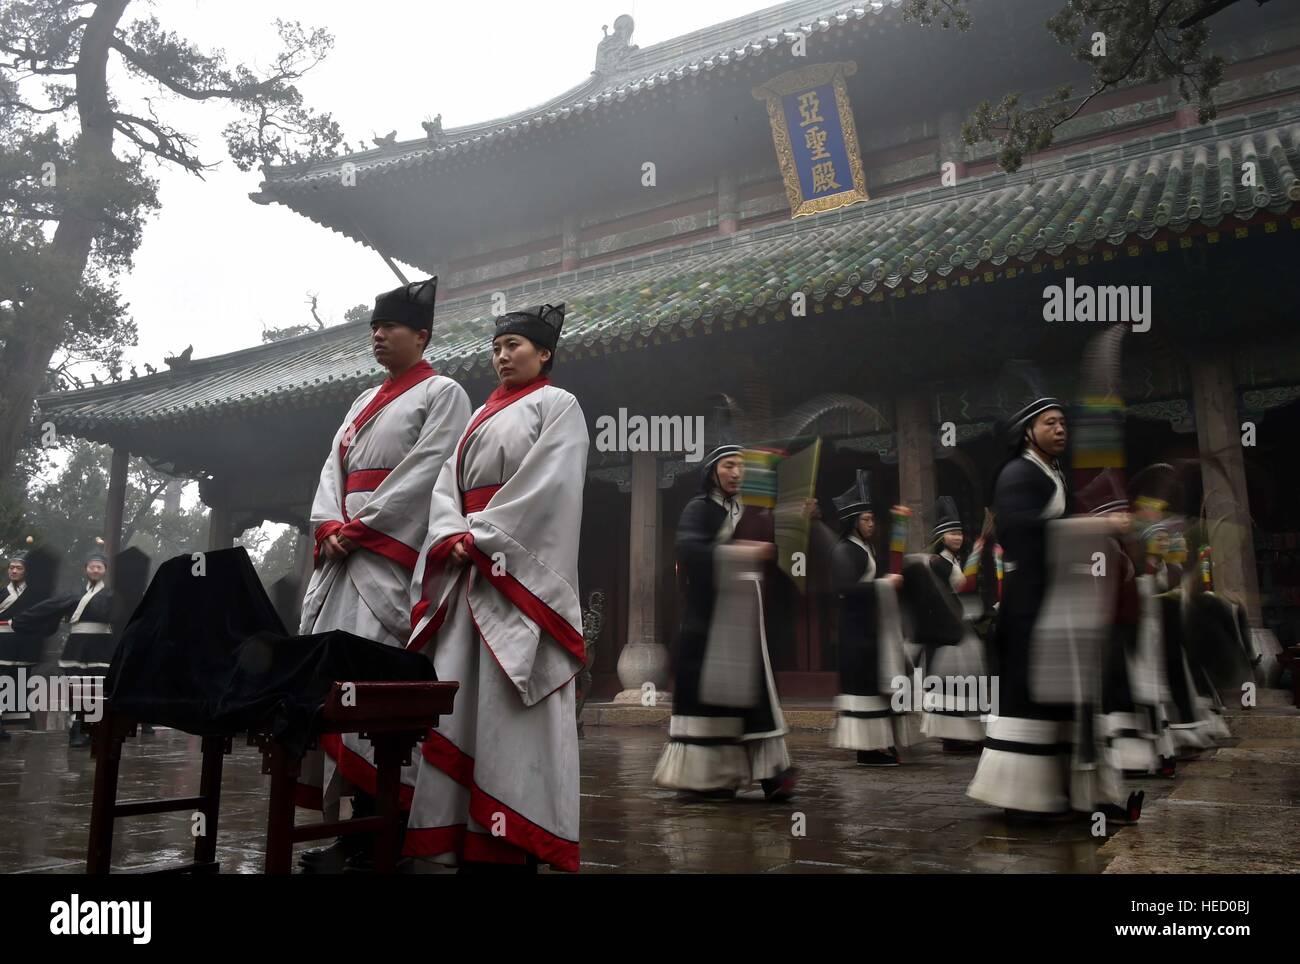 Zoucheng. 21st Dec, 2016. A traditional sacrificial ceremony is held to commemorate Mencius at the Temple and Family Mansion of Mencius in Zoucheng City, east China's Shandong Province, Dec. 21, 2016, the Winter Solstice. Mencius (372-289 BC), or Meng Zi, was a great philosopher of ancient China. He traveled all his life expounding Confucianism. © Zhu Zheng/Xinhua/Alamy Live News Stock Photo